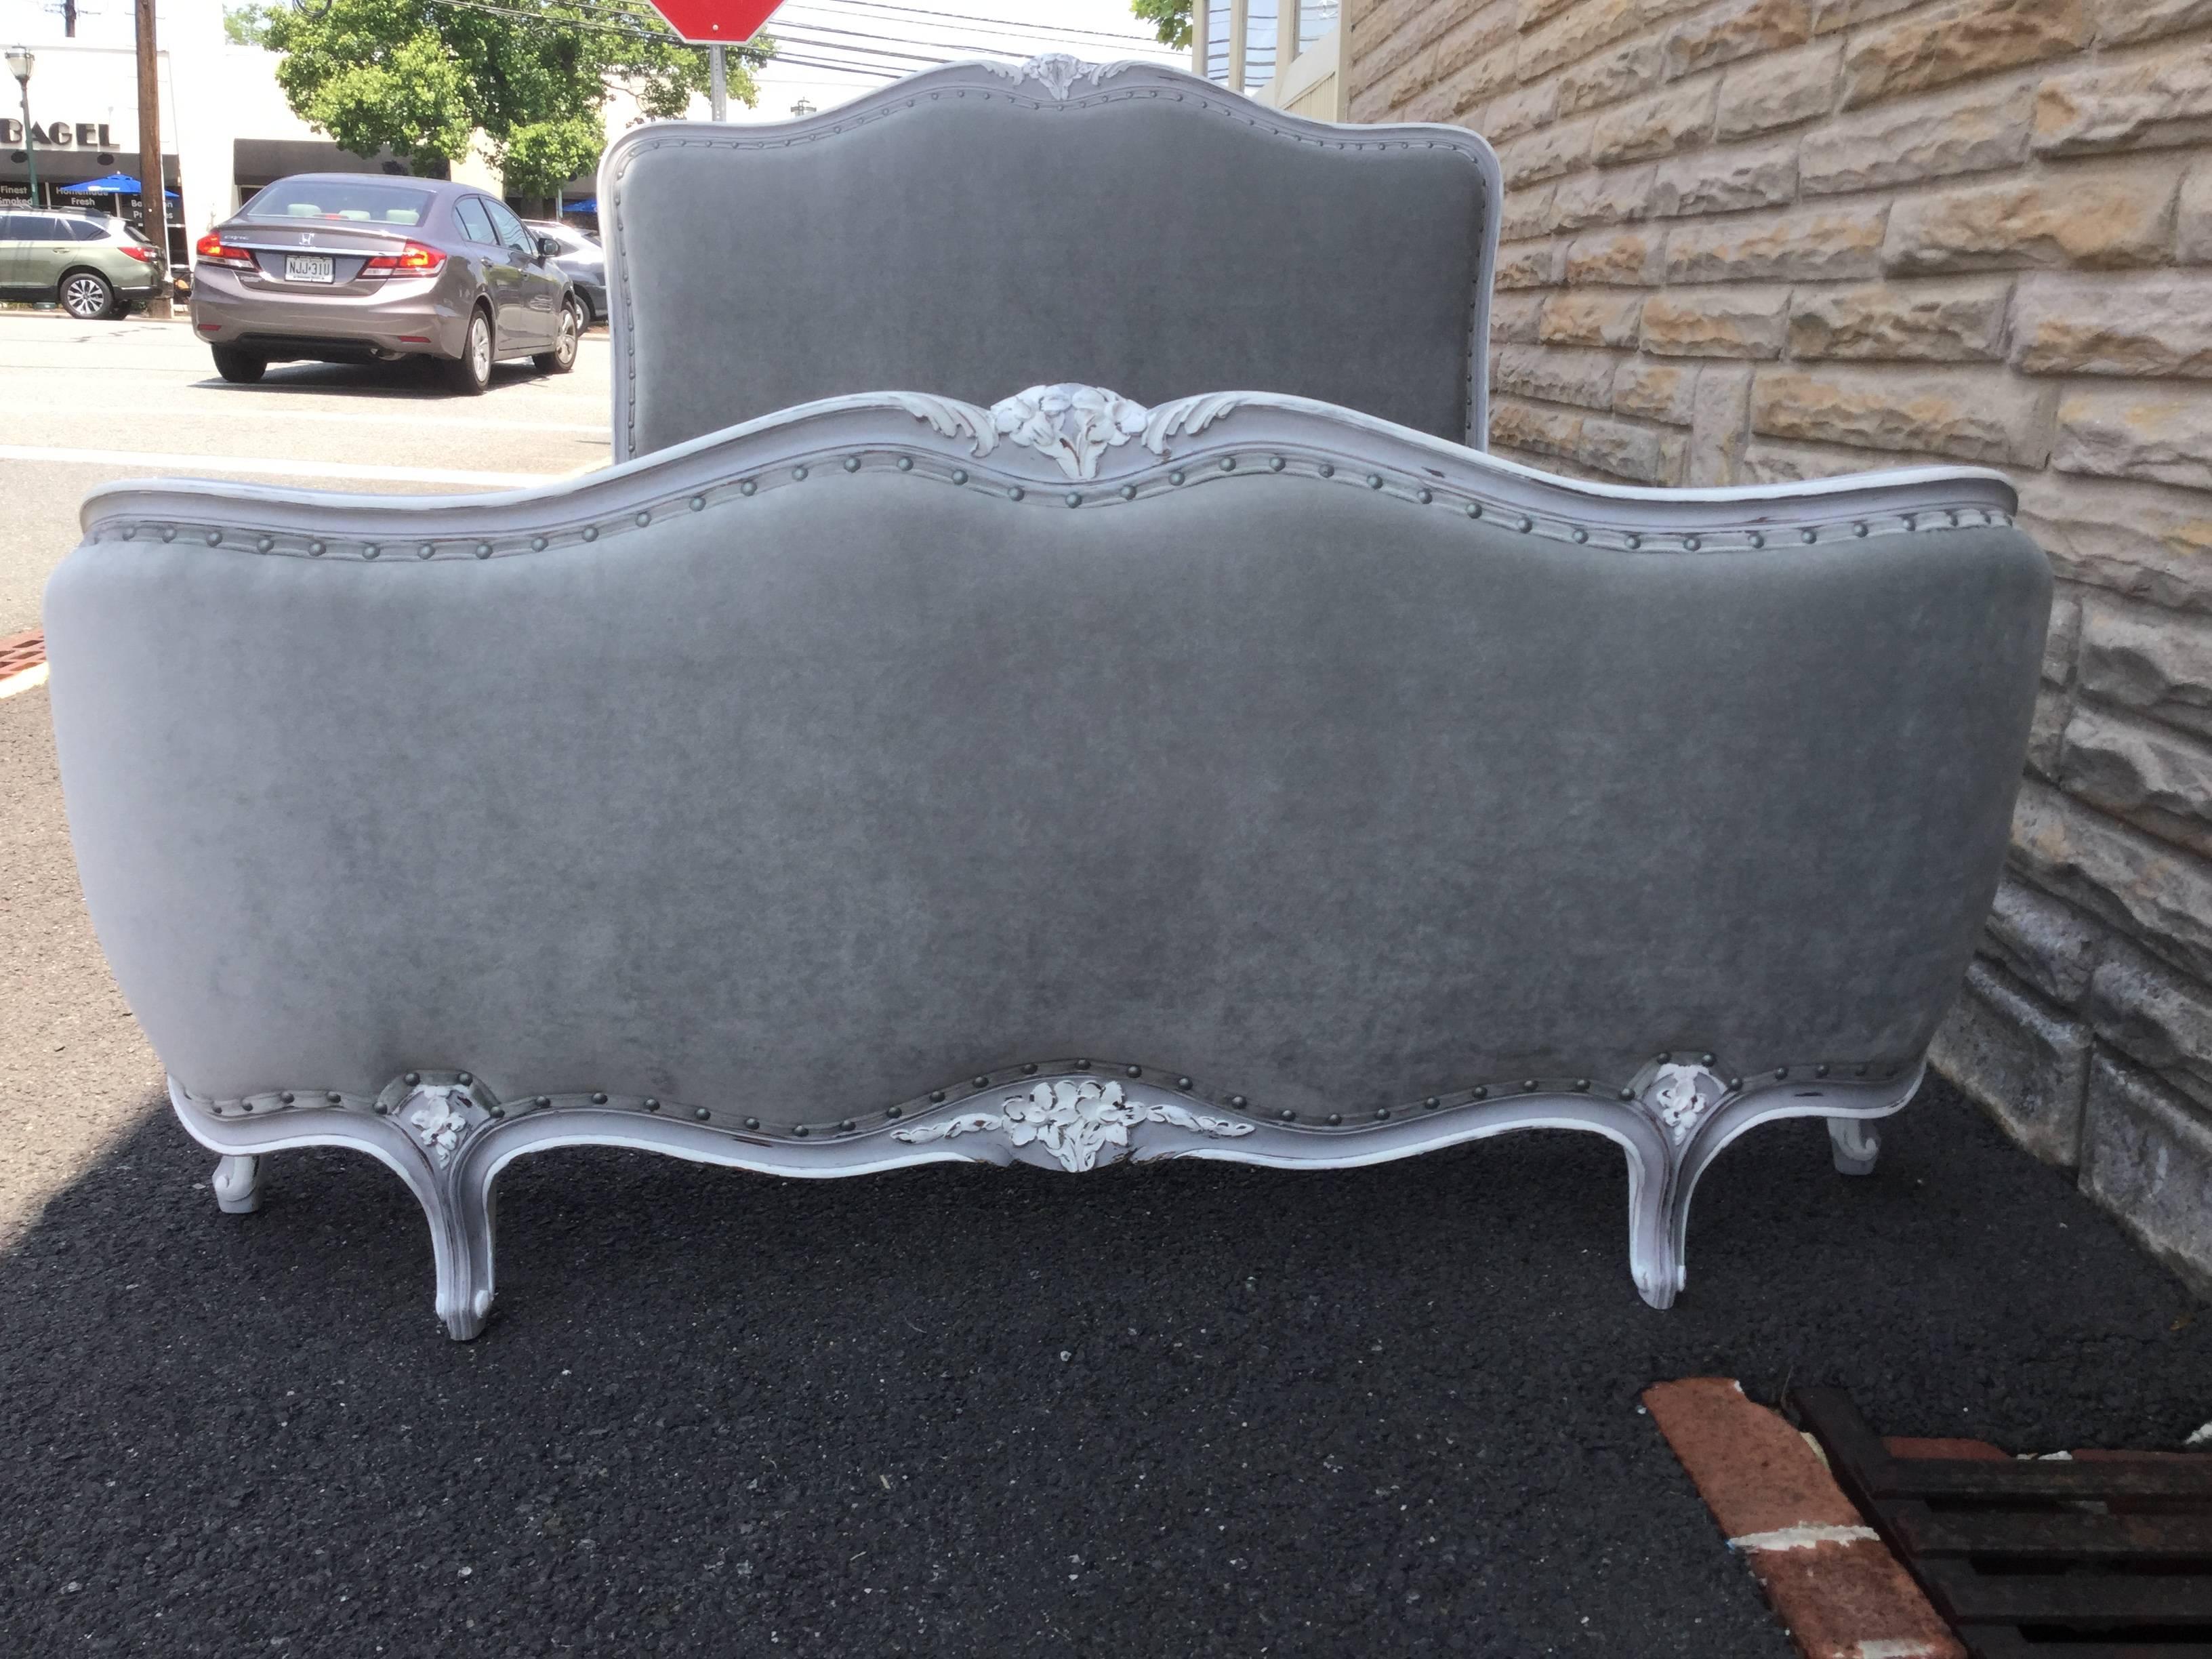 Louis XV style full-size bed custom painted French dove gray with white
accents. Carvings on the headboard and footboard are highlighted in white.
The elegant footboard is upholstered on both exterior and interior and
features a rounded design.